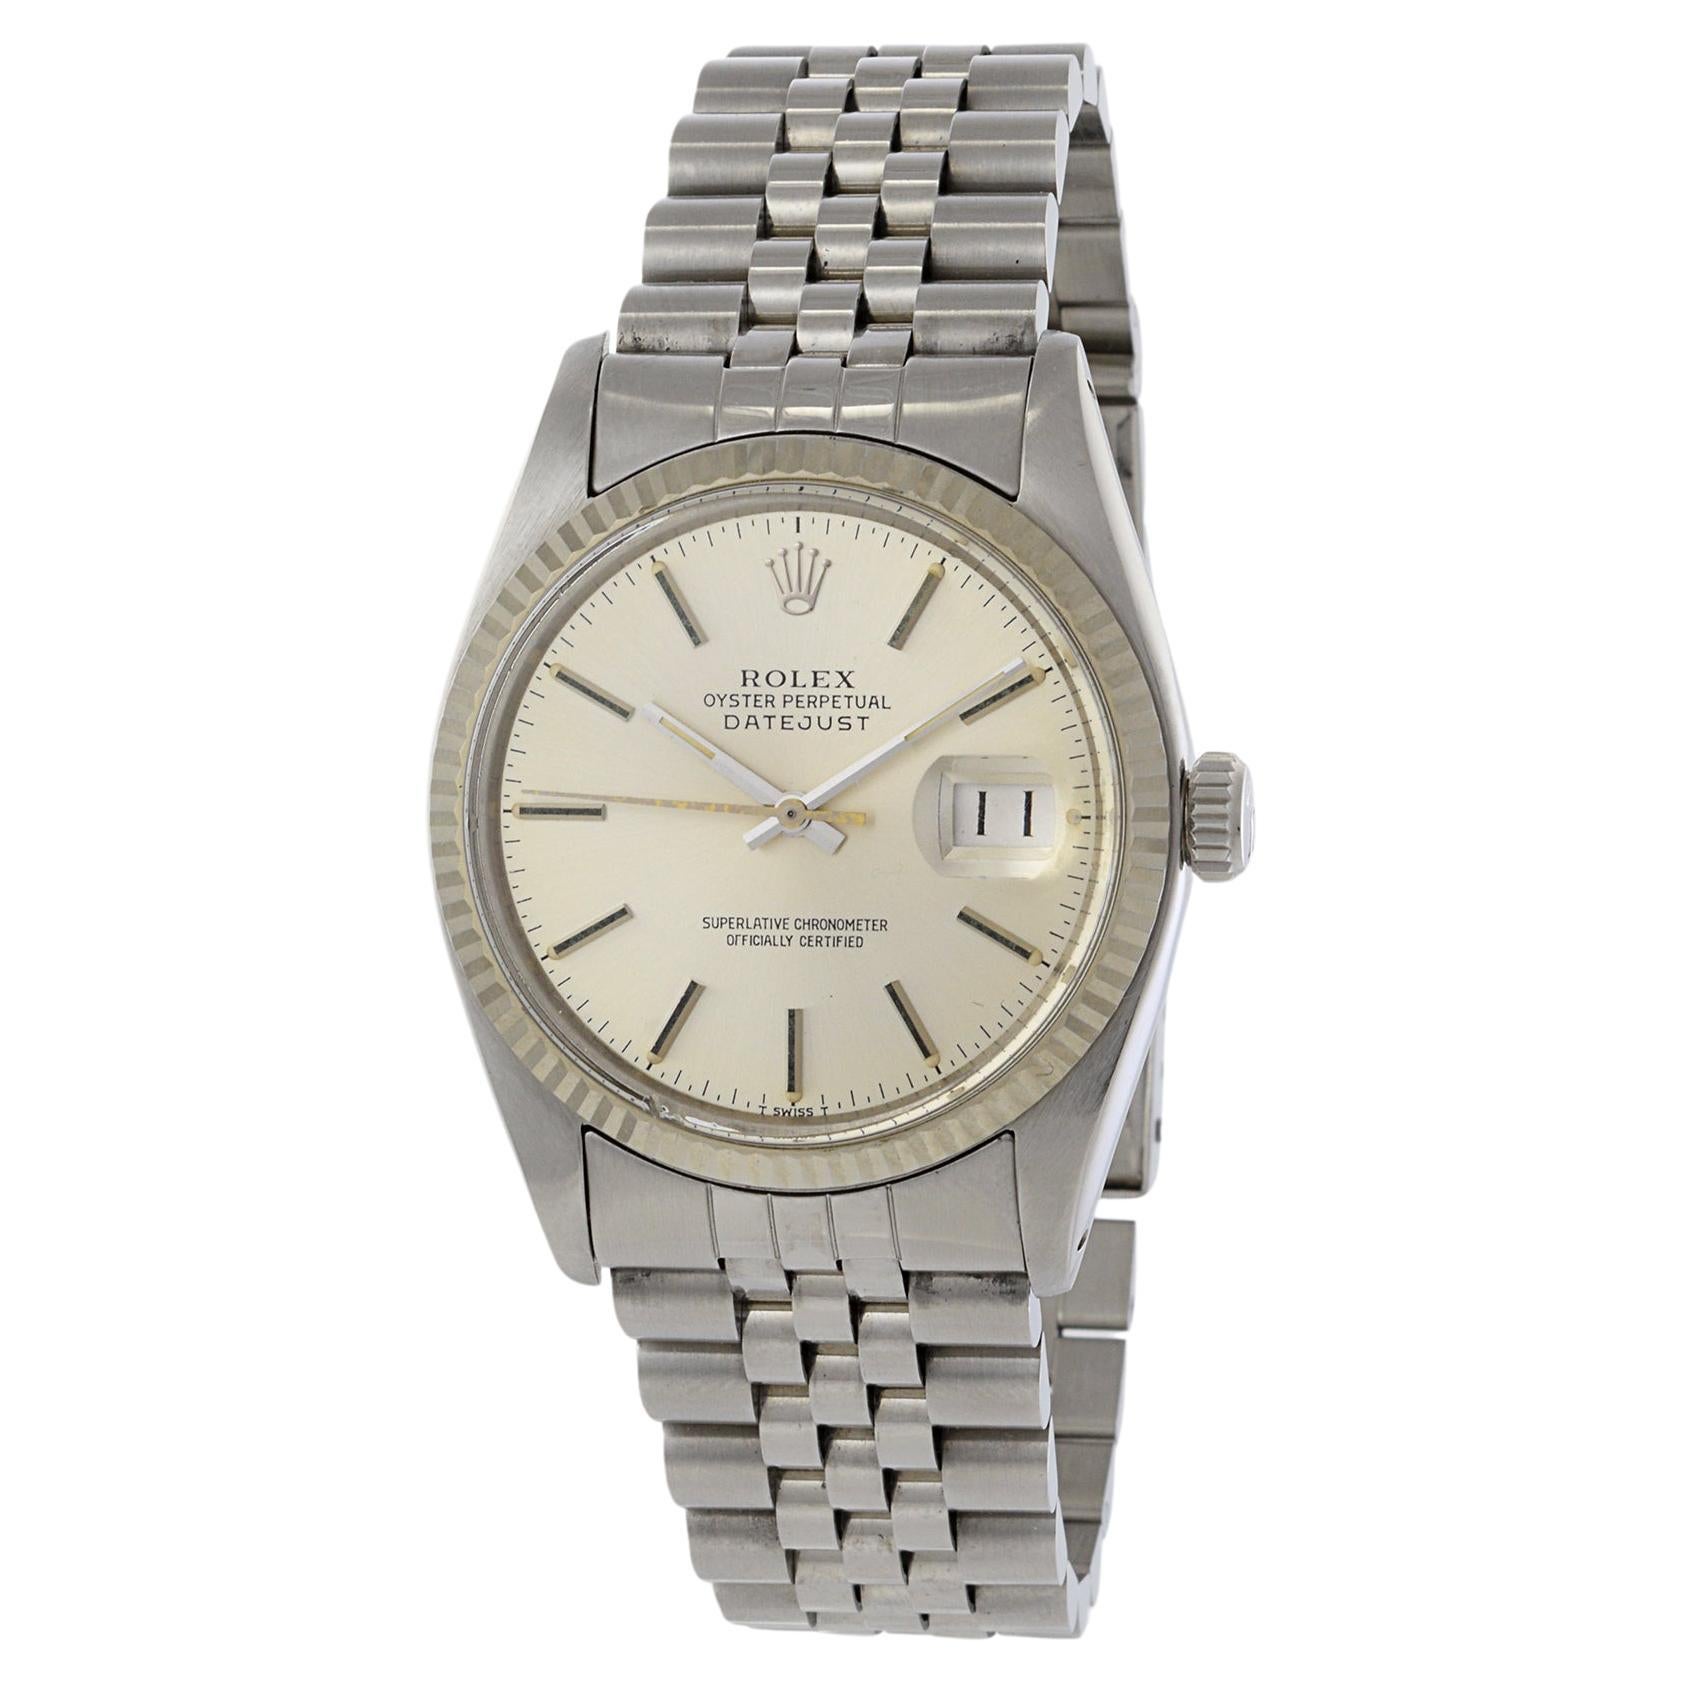 Rolex Datejust 36 Quickset Reference 16014 For Sale